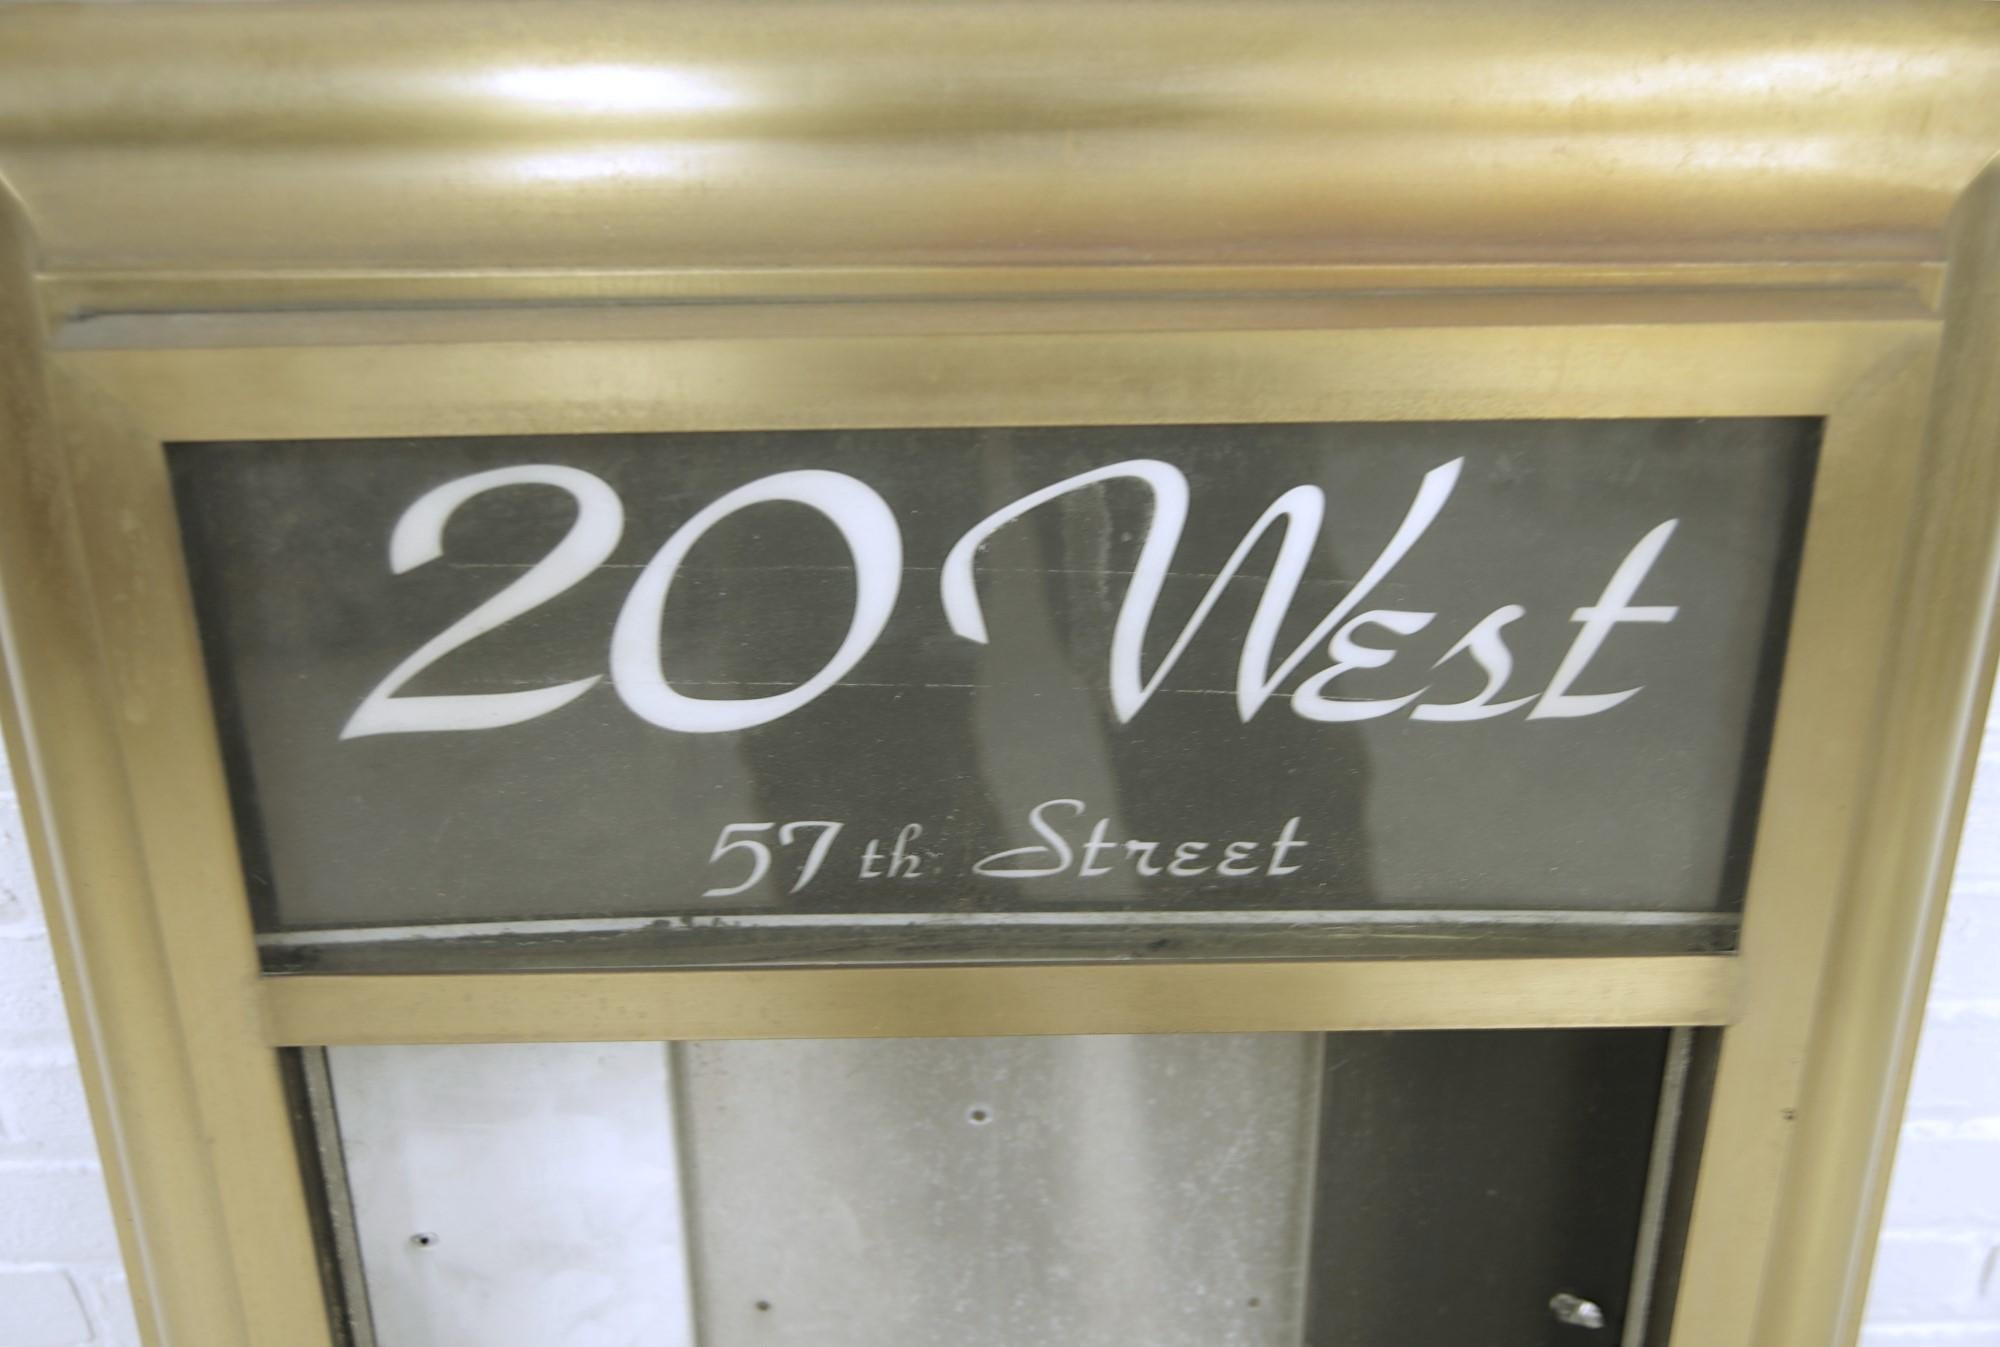 1980s reclaimed building directory or registrar from 20 West 57th St made of brass and aluminum.